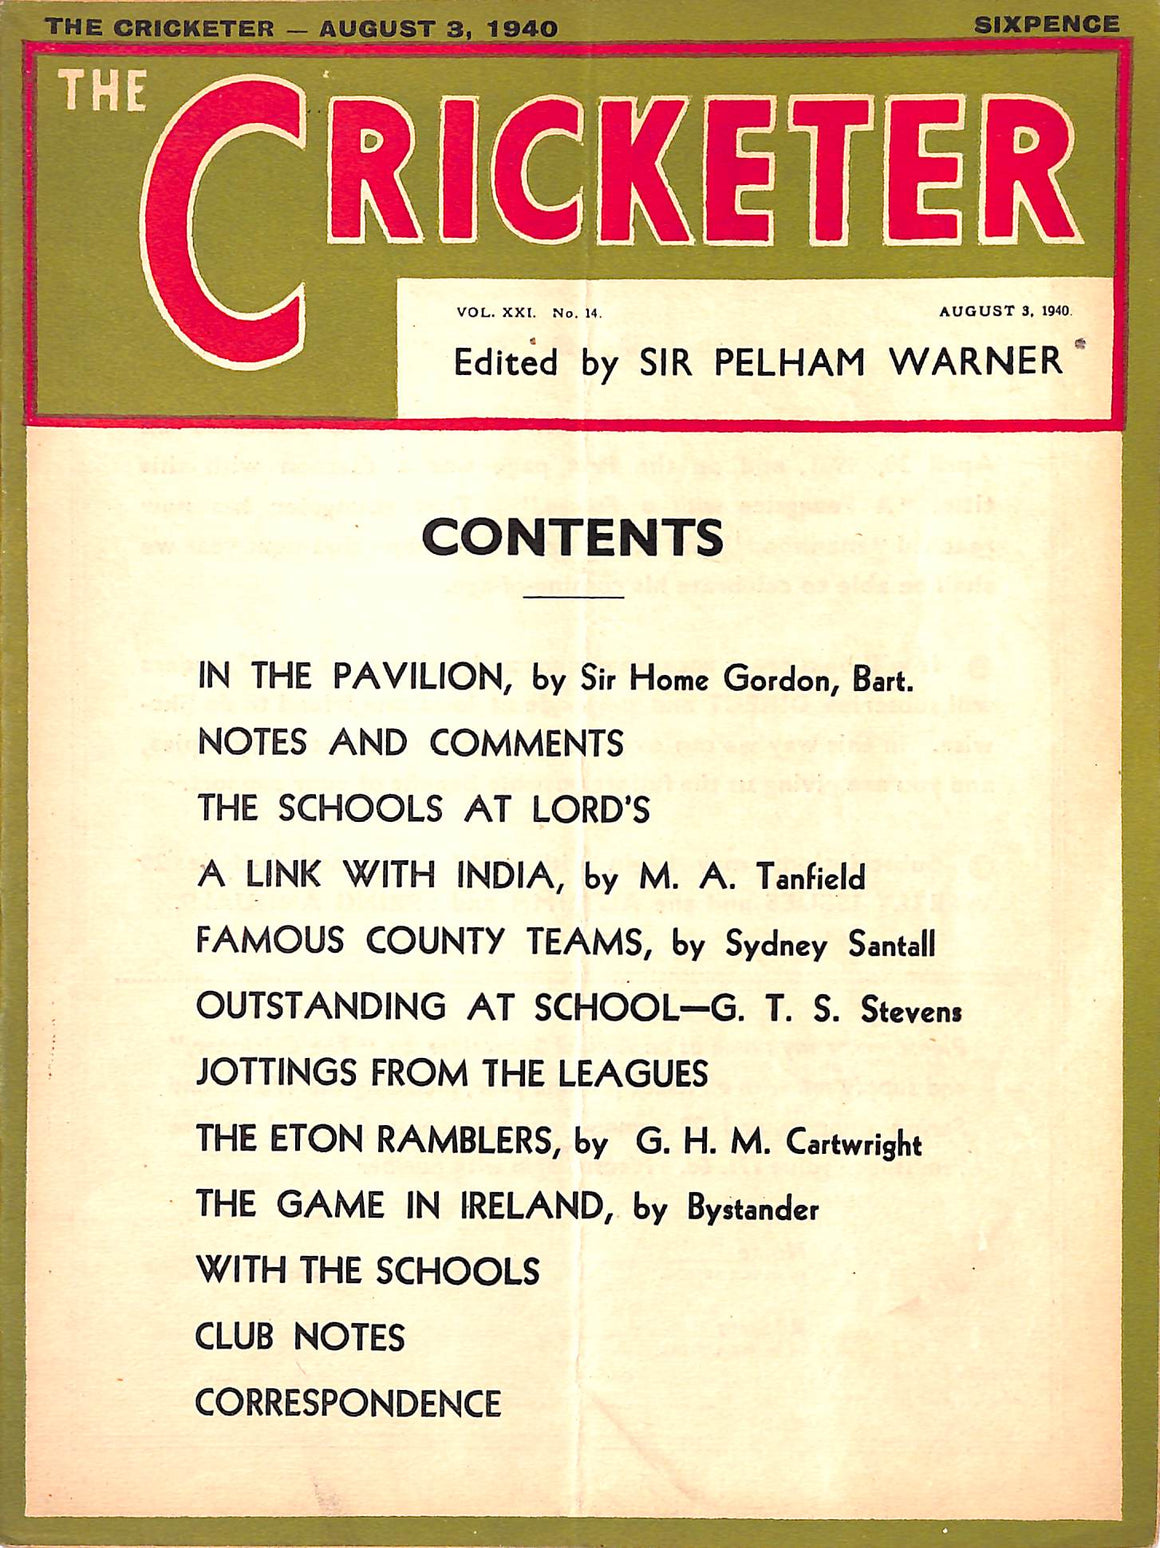 The Cricketer - August 3, 1940